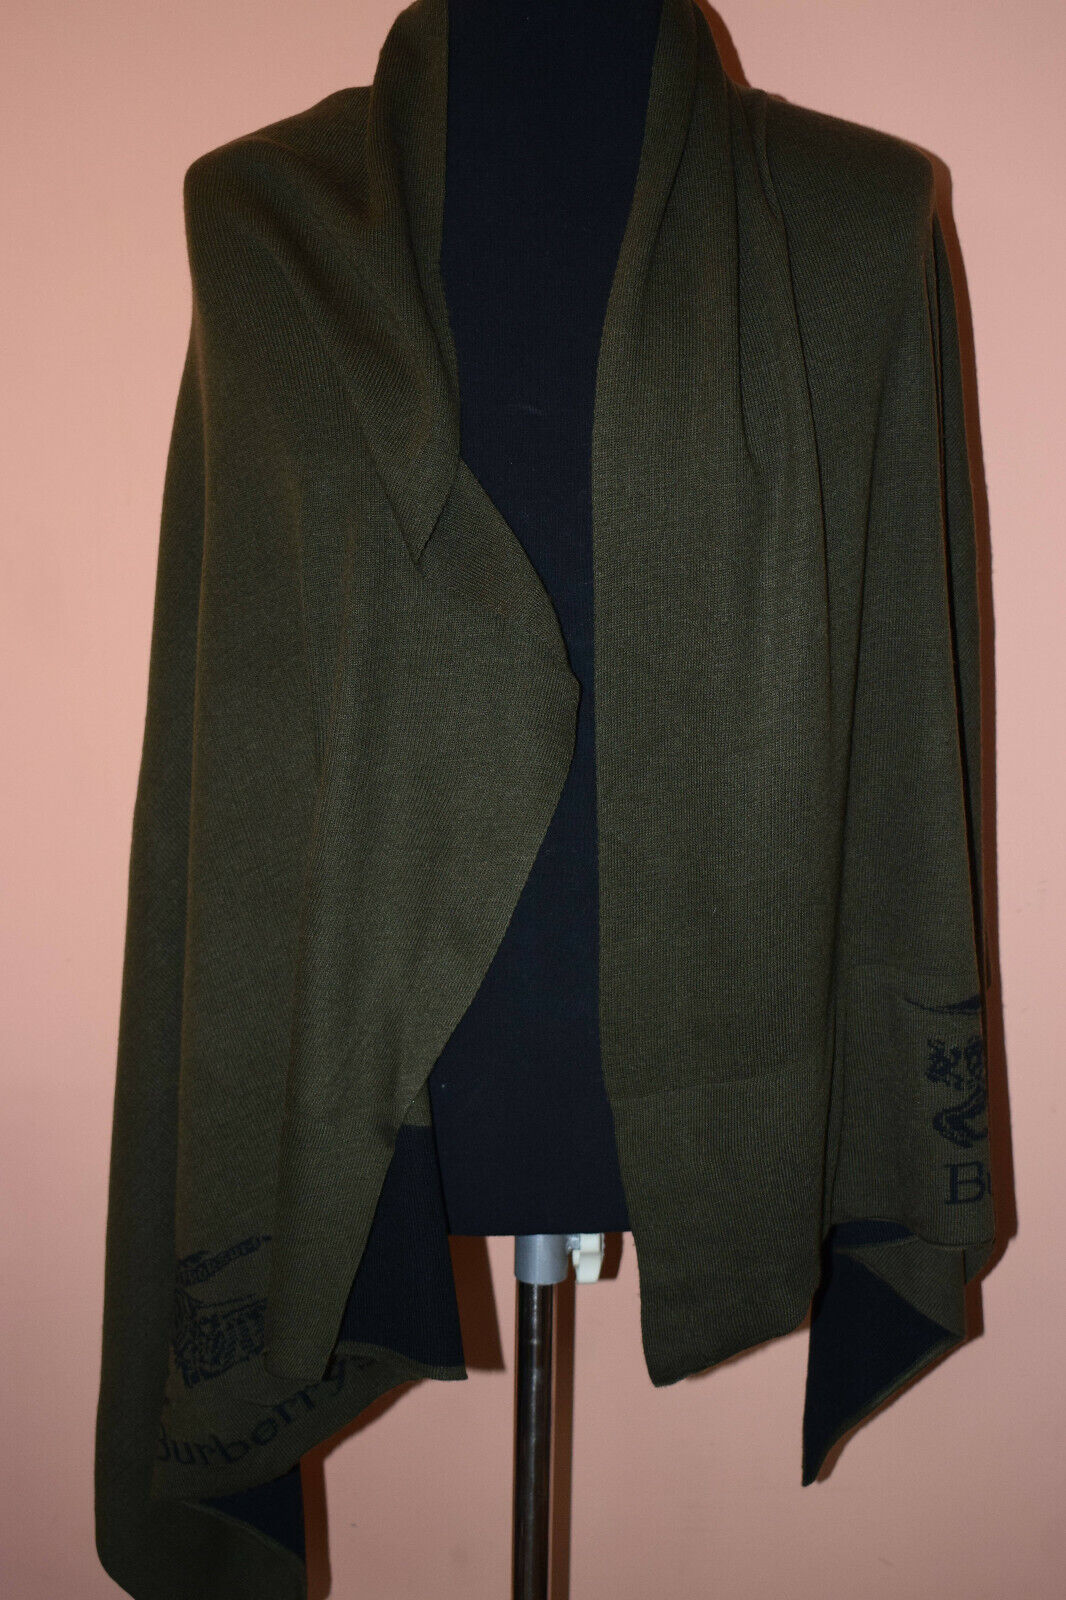 Burberry Green and Black SCARF SHAWL color in Good Condition 